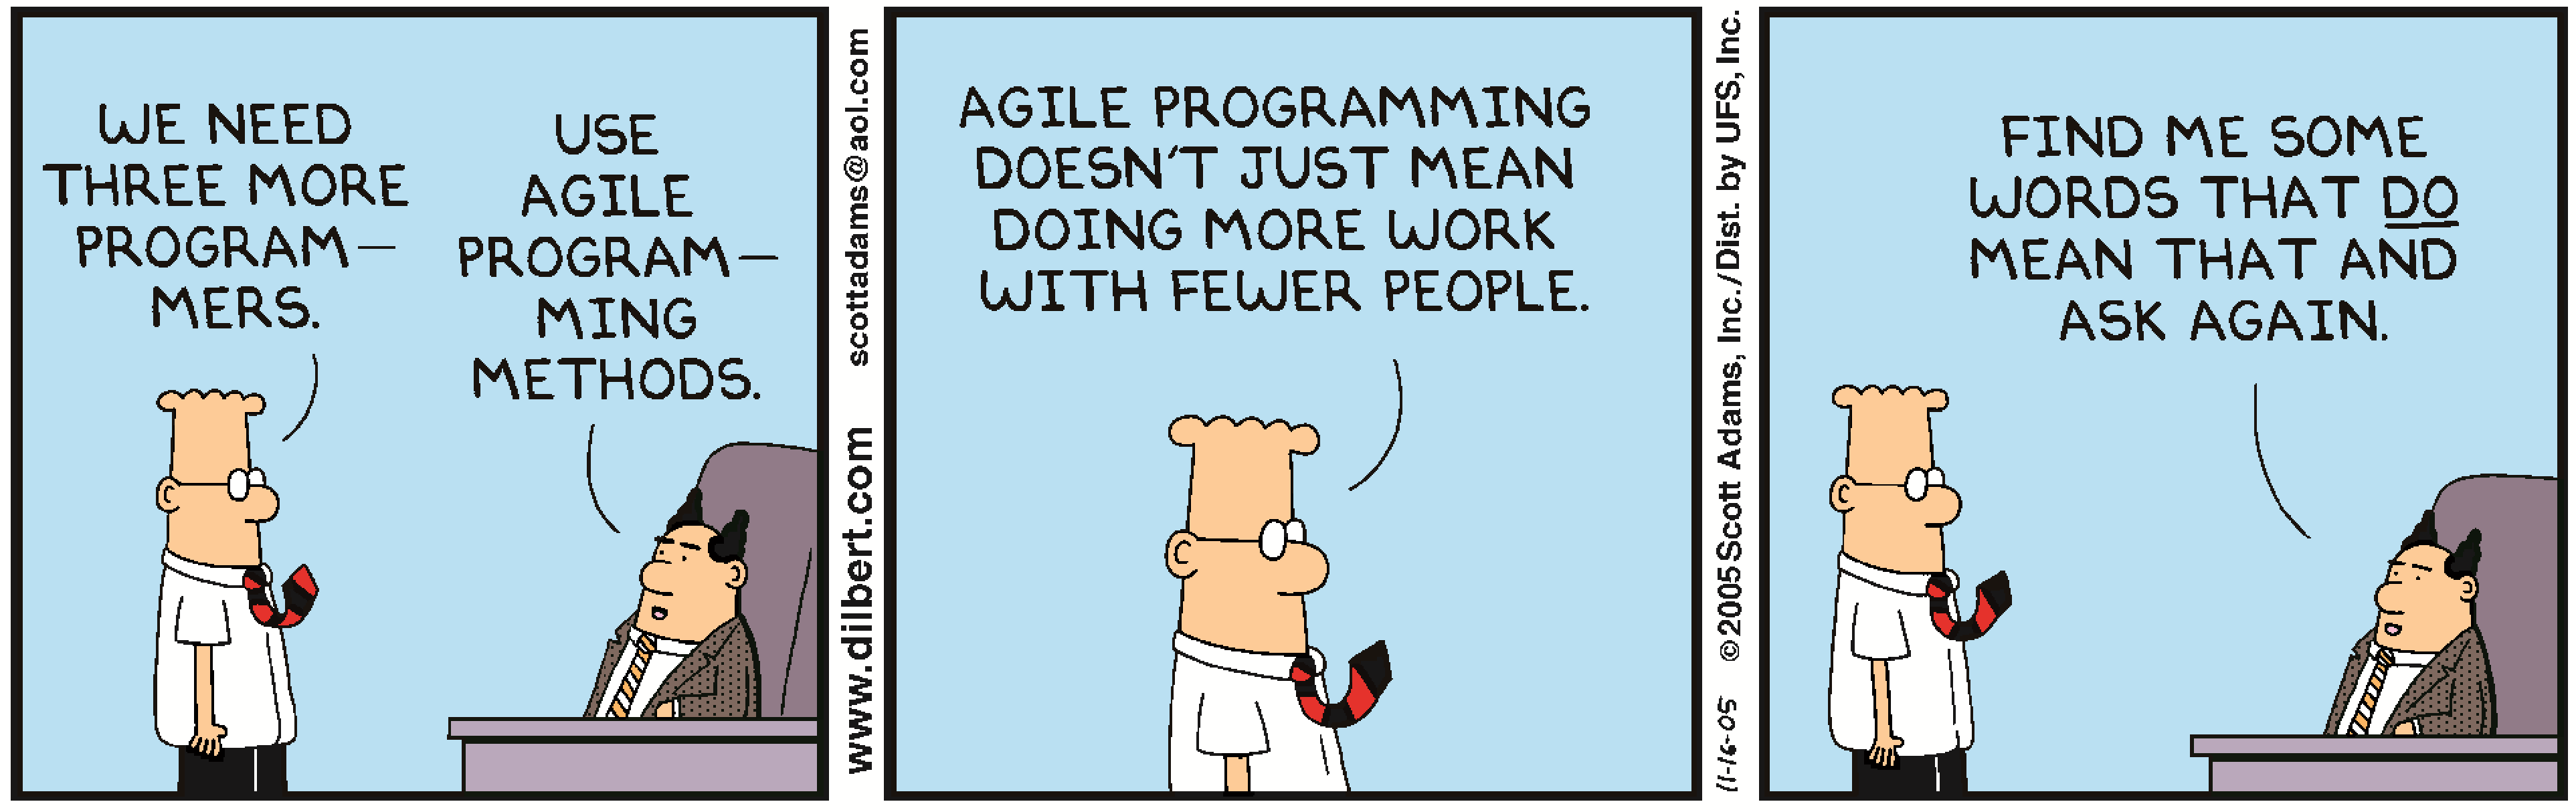 challenges with agile managers don't understand it